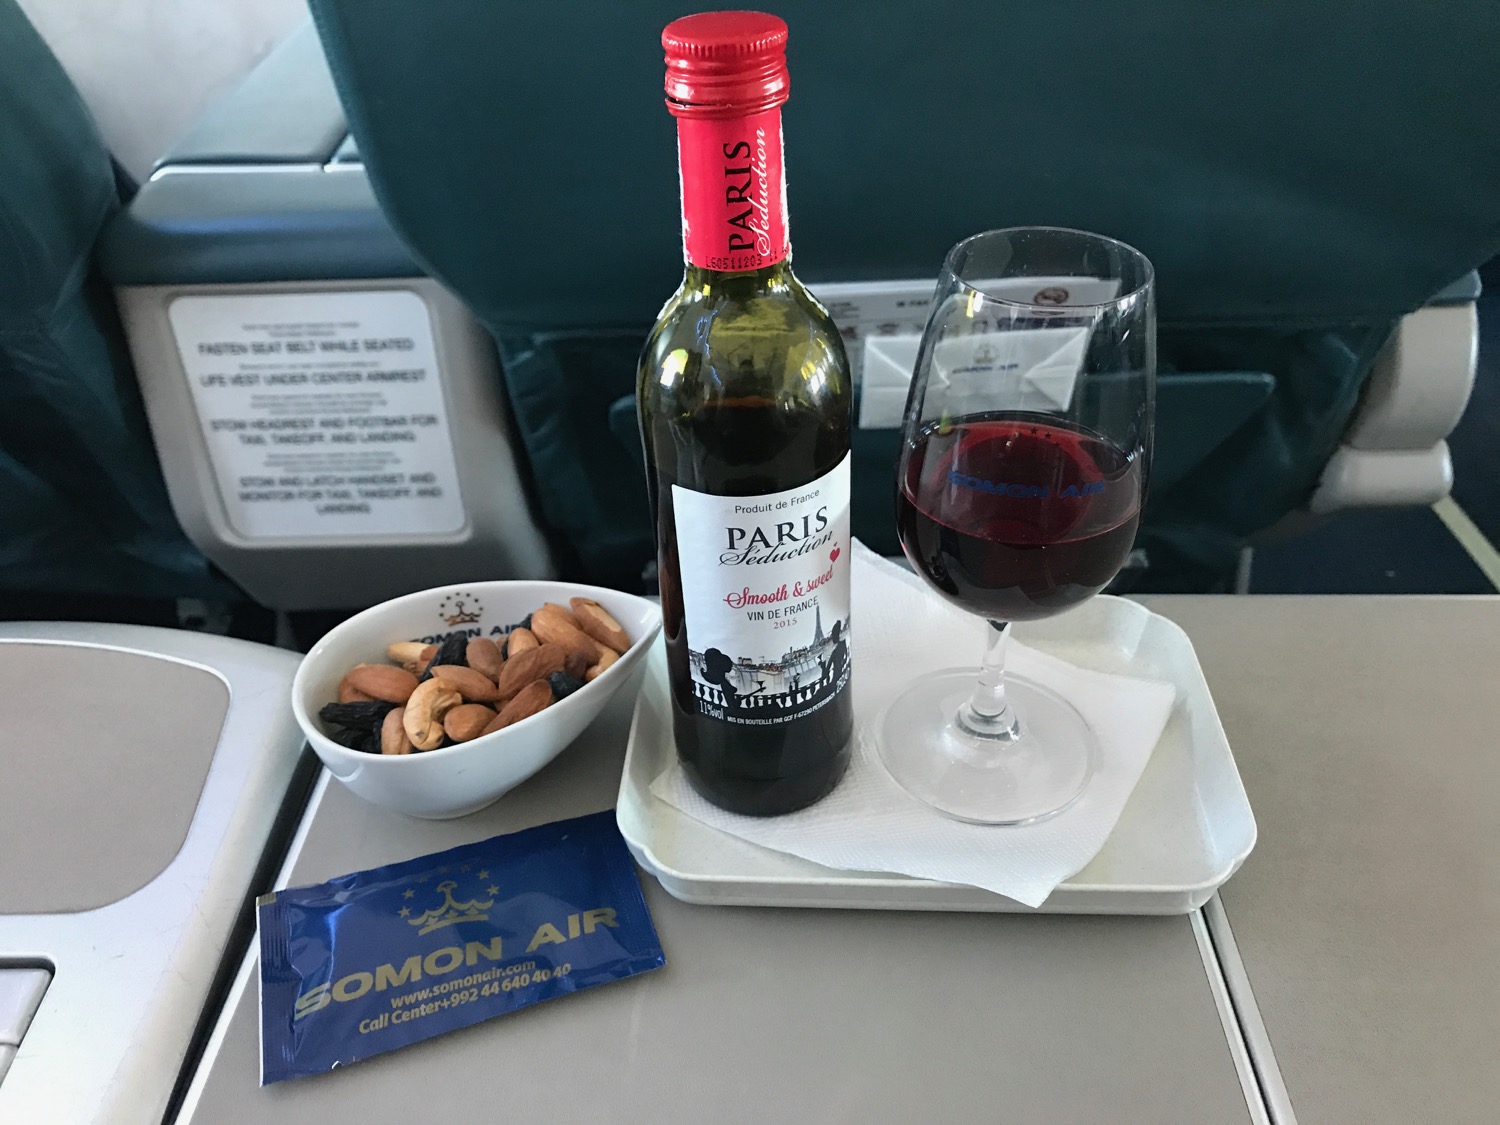 a bottle of wine and a glass of wine on a tray